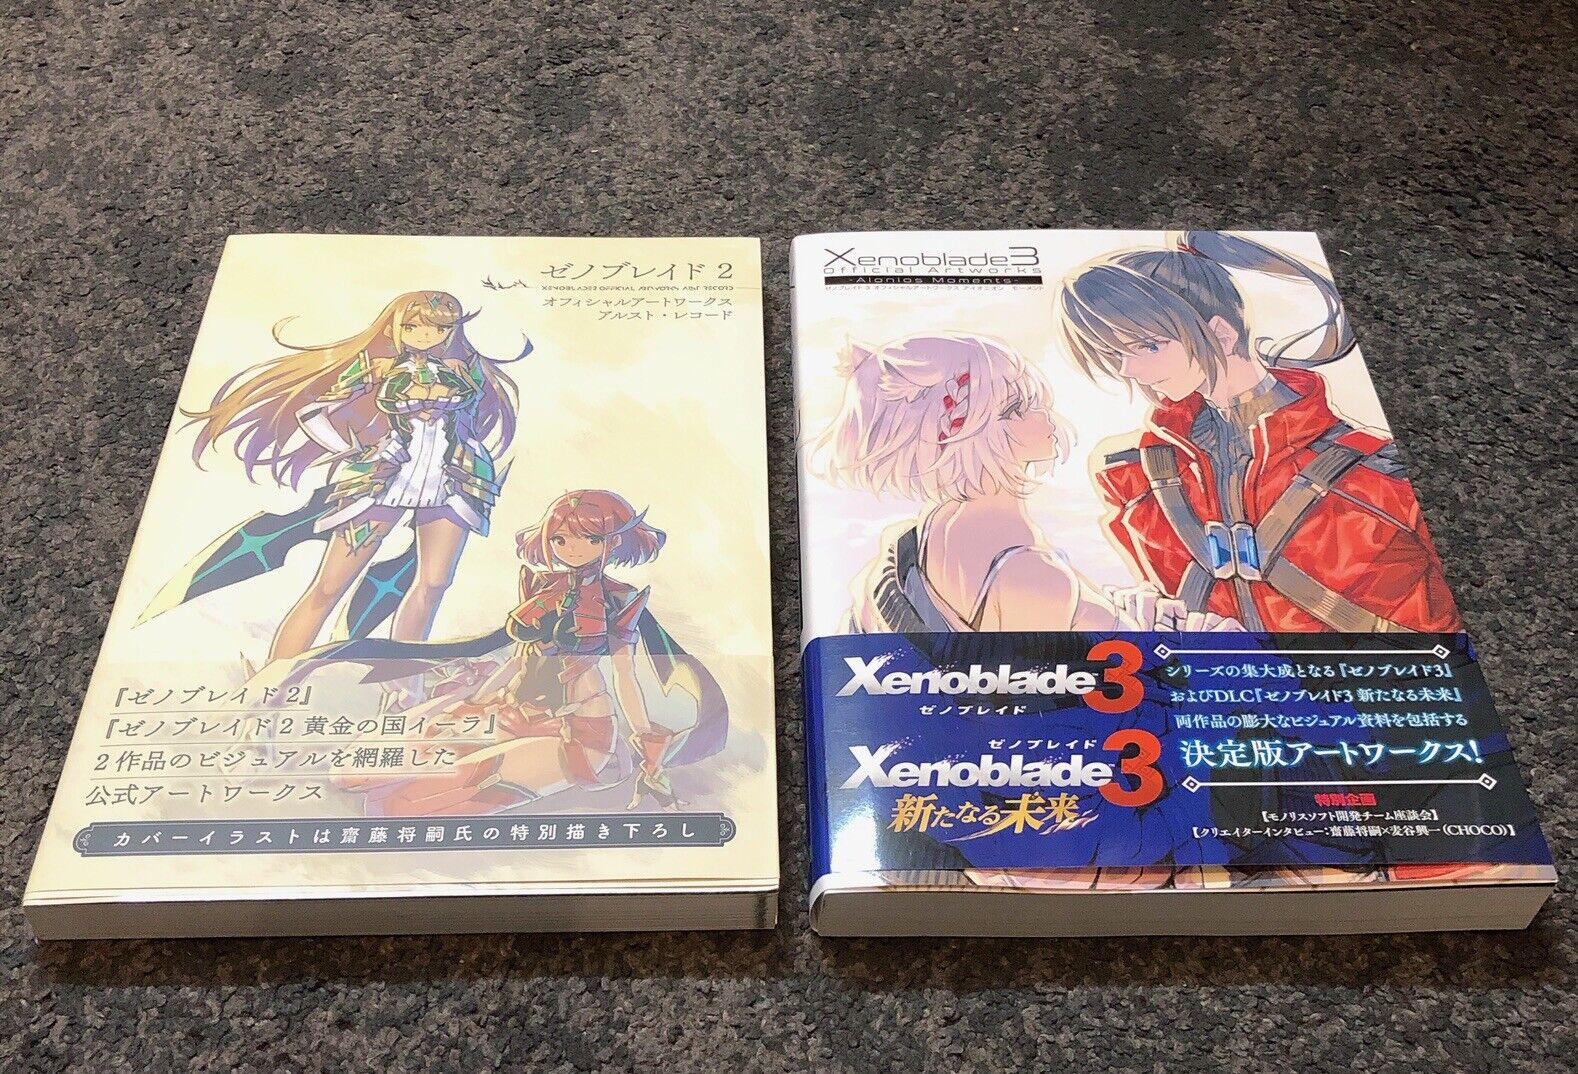 Xenoblade 2 3 Official Art Works Set Alrest Record Aionions Moments Art Book JP